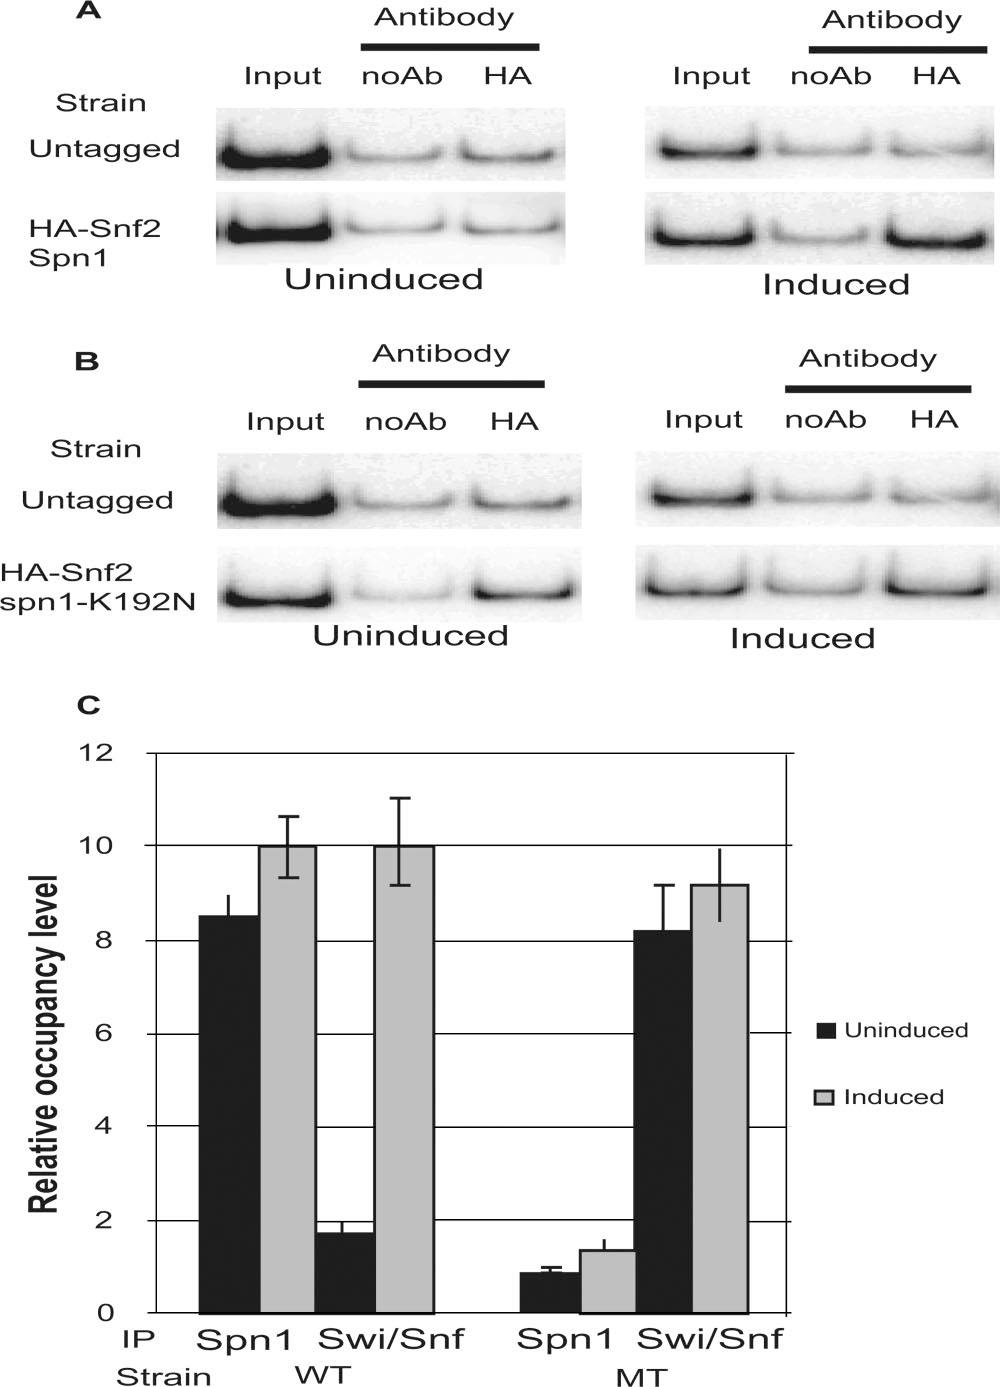 The indicated strains were grown under uninduced and induced conditions, and total RNA was isolated and analyzed via S1 nuclease assay.